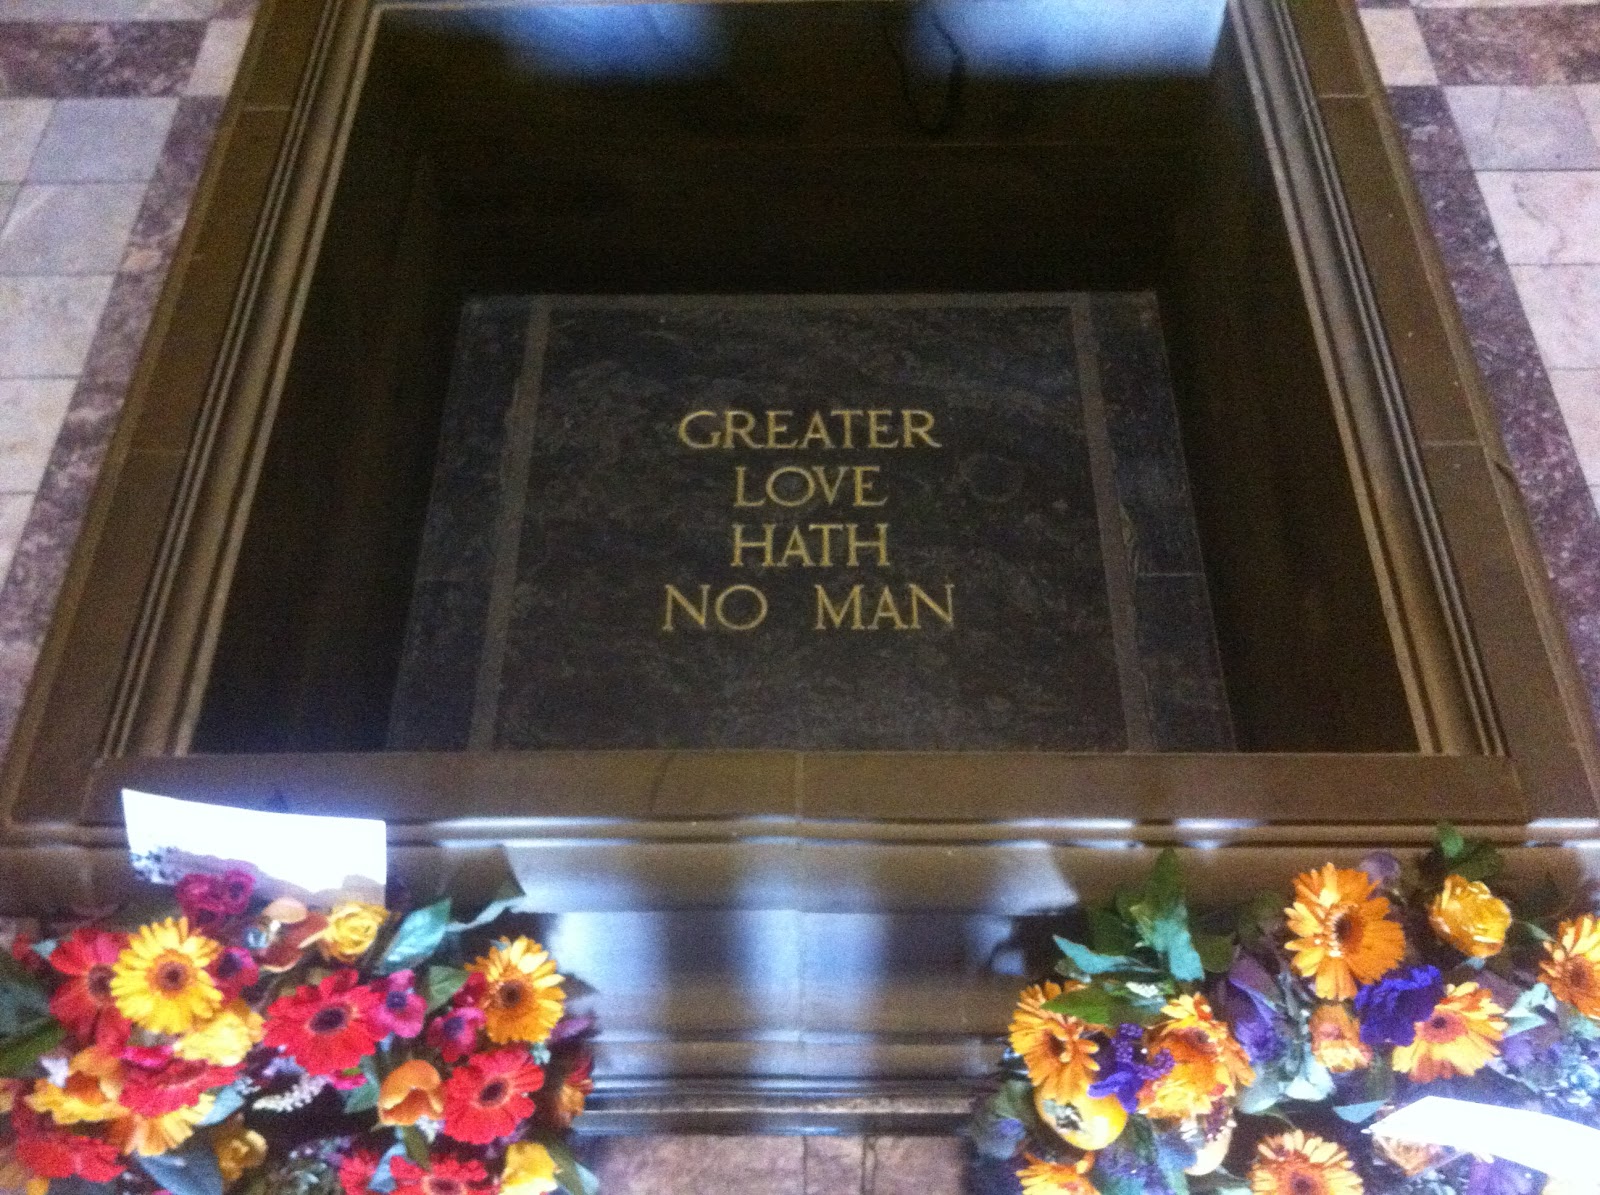 The most special place in the Shrine is called the "Stone of Remembrance" It is inscribed with the words "Greater Love Hath No Man" which is a quote from